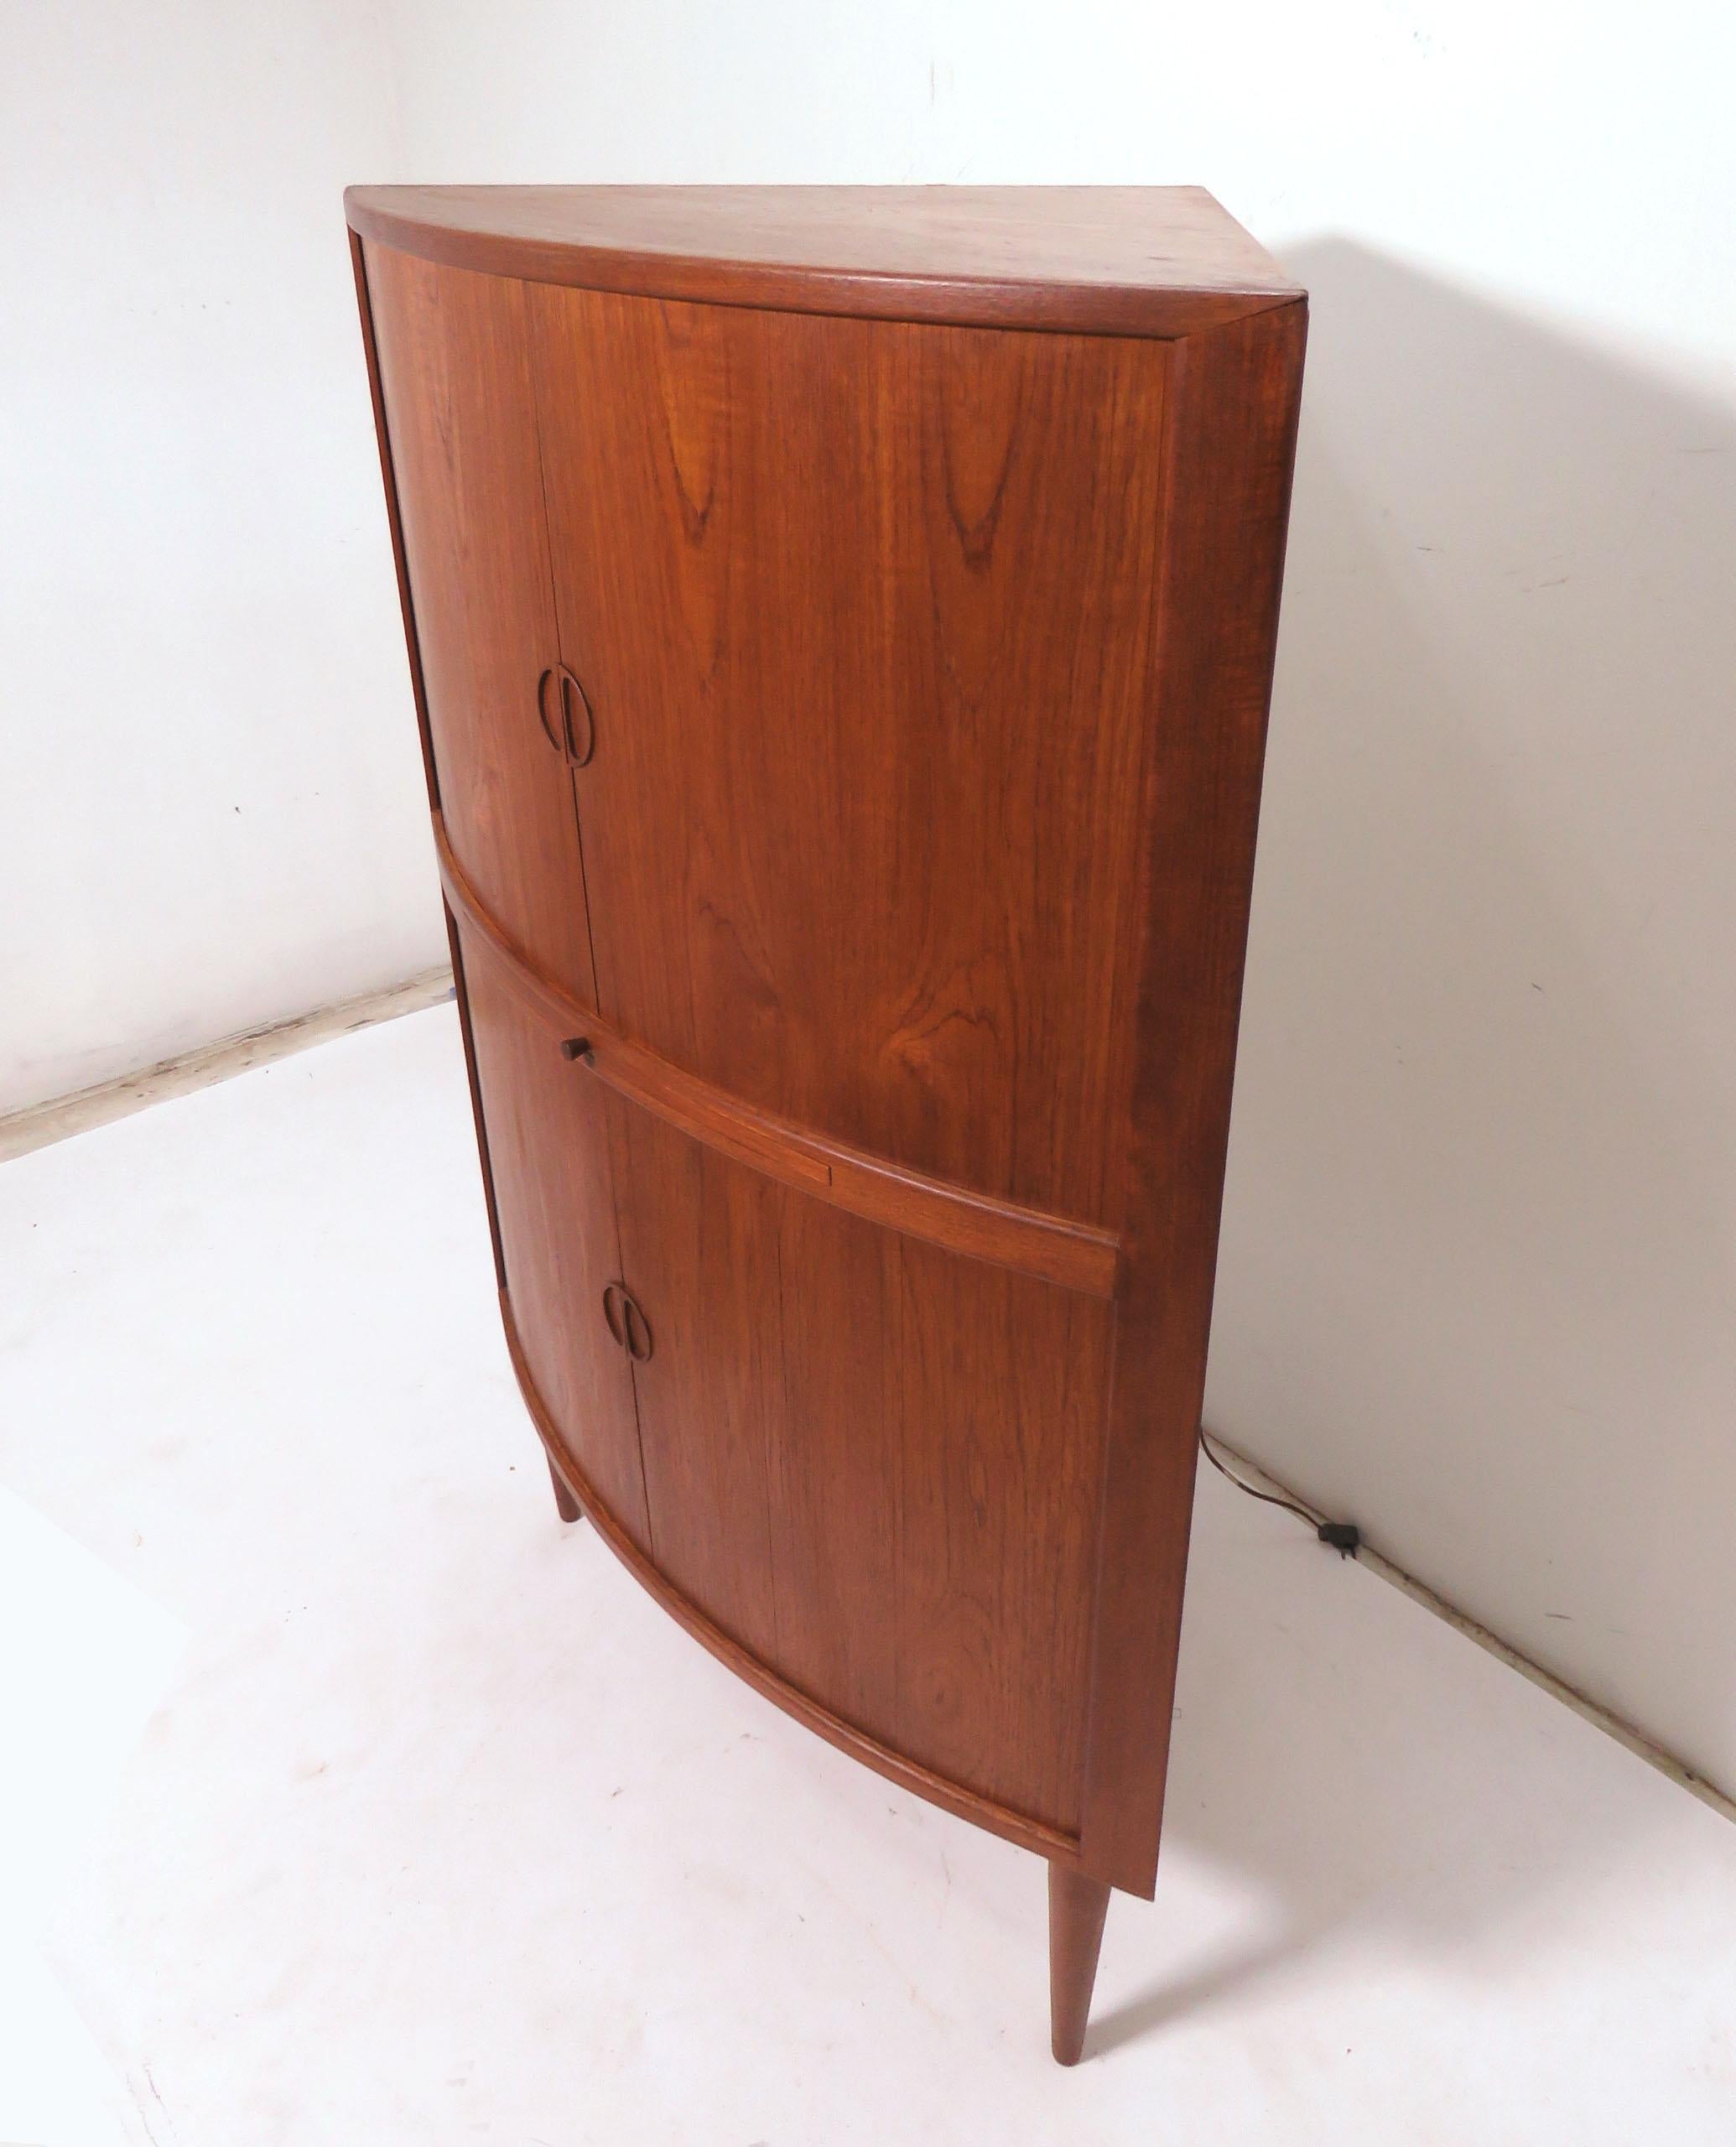 Danish teak corner cabinet with tambour doors. Upper section includes a backlight, mirrors, a glass shelf, and two storage drawers. pull-out shelf for preparing drinks. Lower section for storage of bottles.